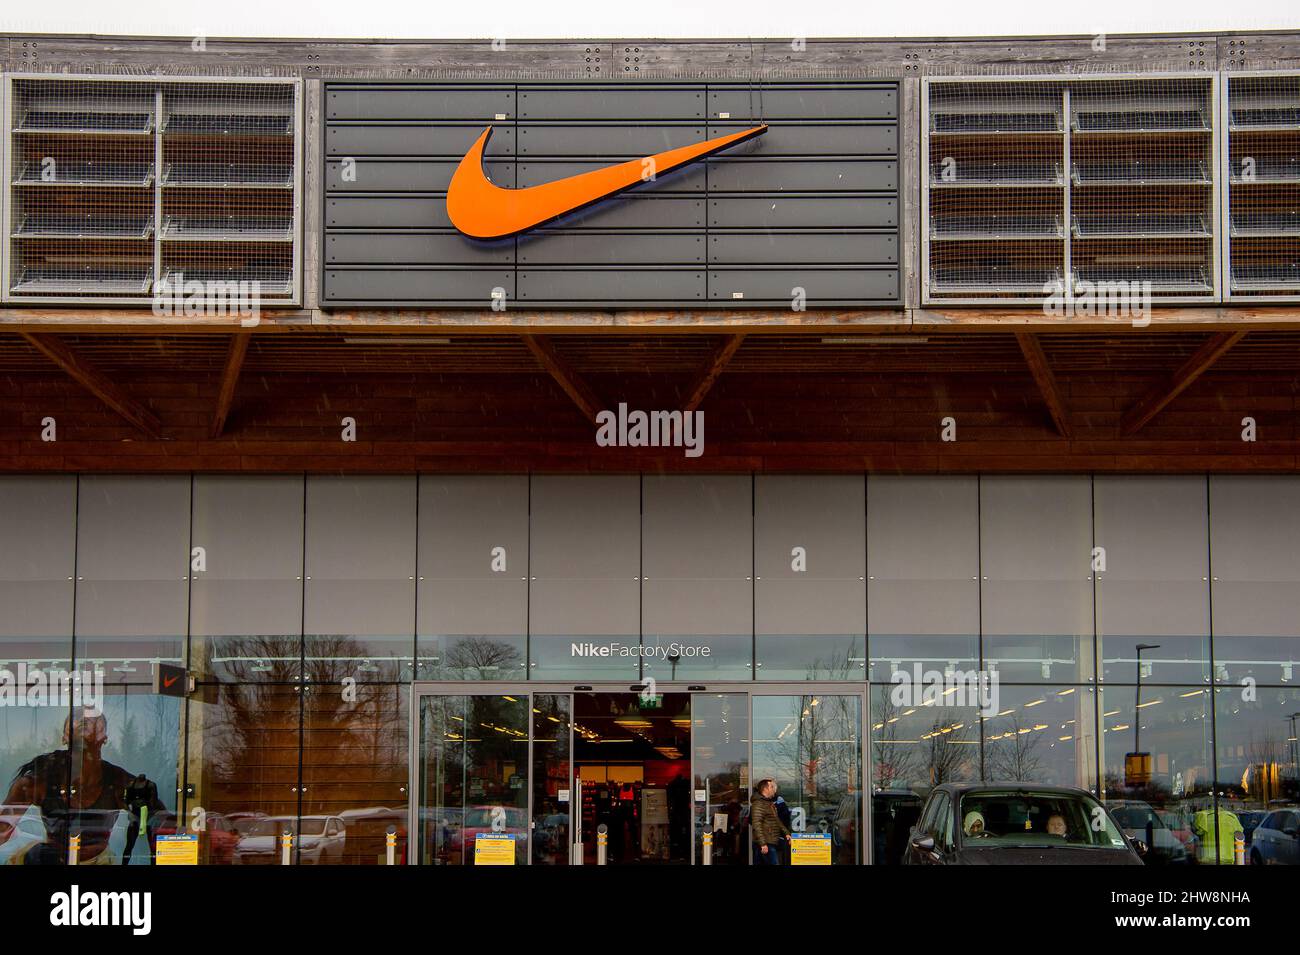 Nike Outlet Store High Resolution Stock Photography and Images - Alamy